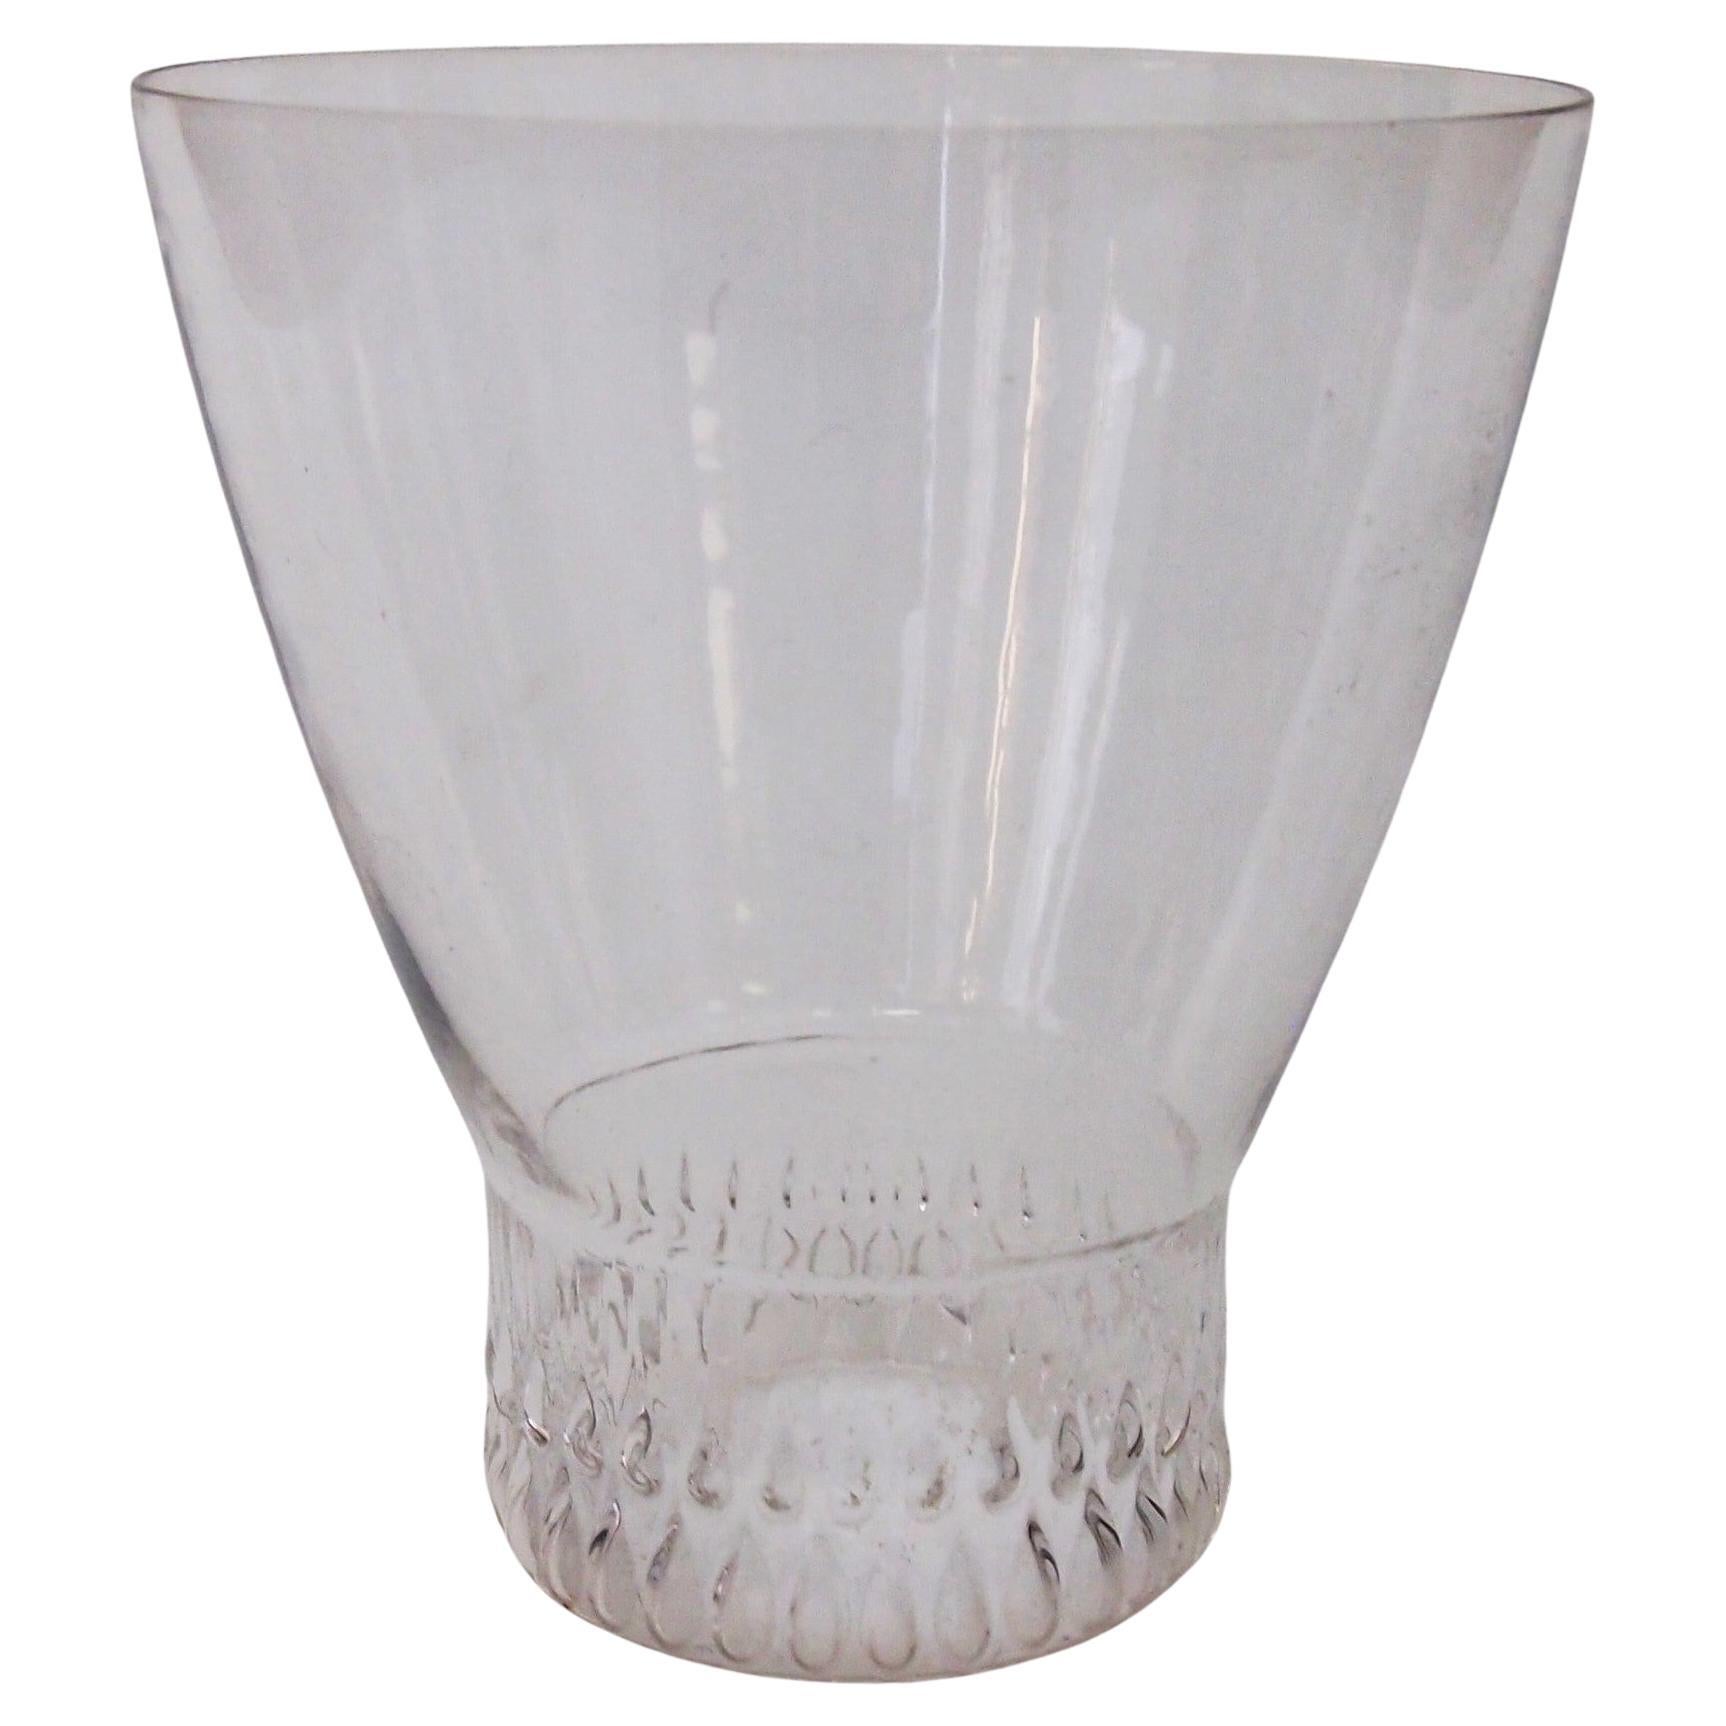 Exceptionally Rare Rene Lalique signed Clos St Odile glass 1922